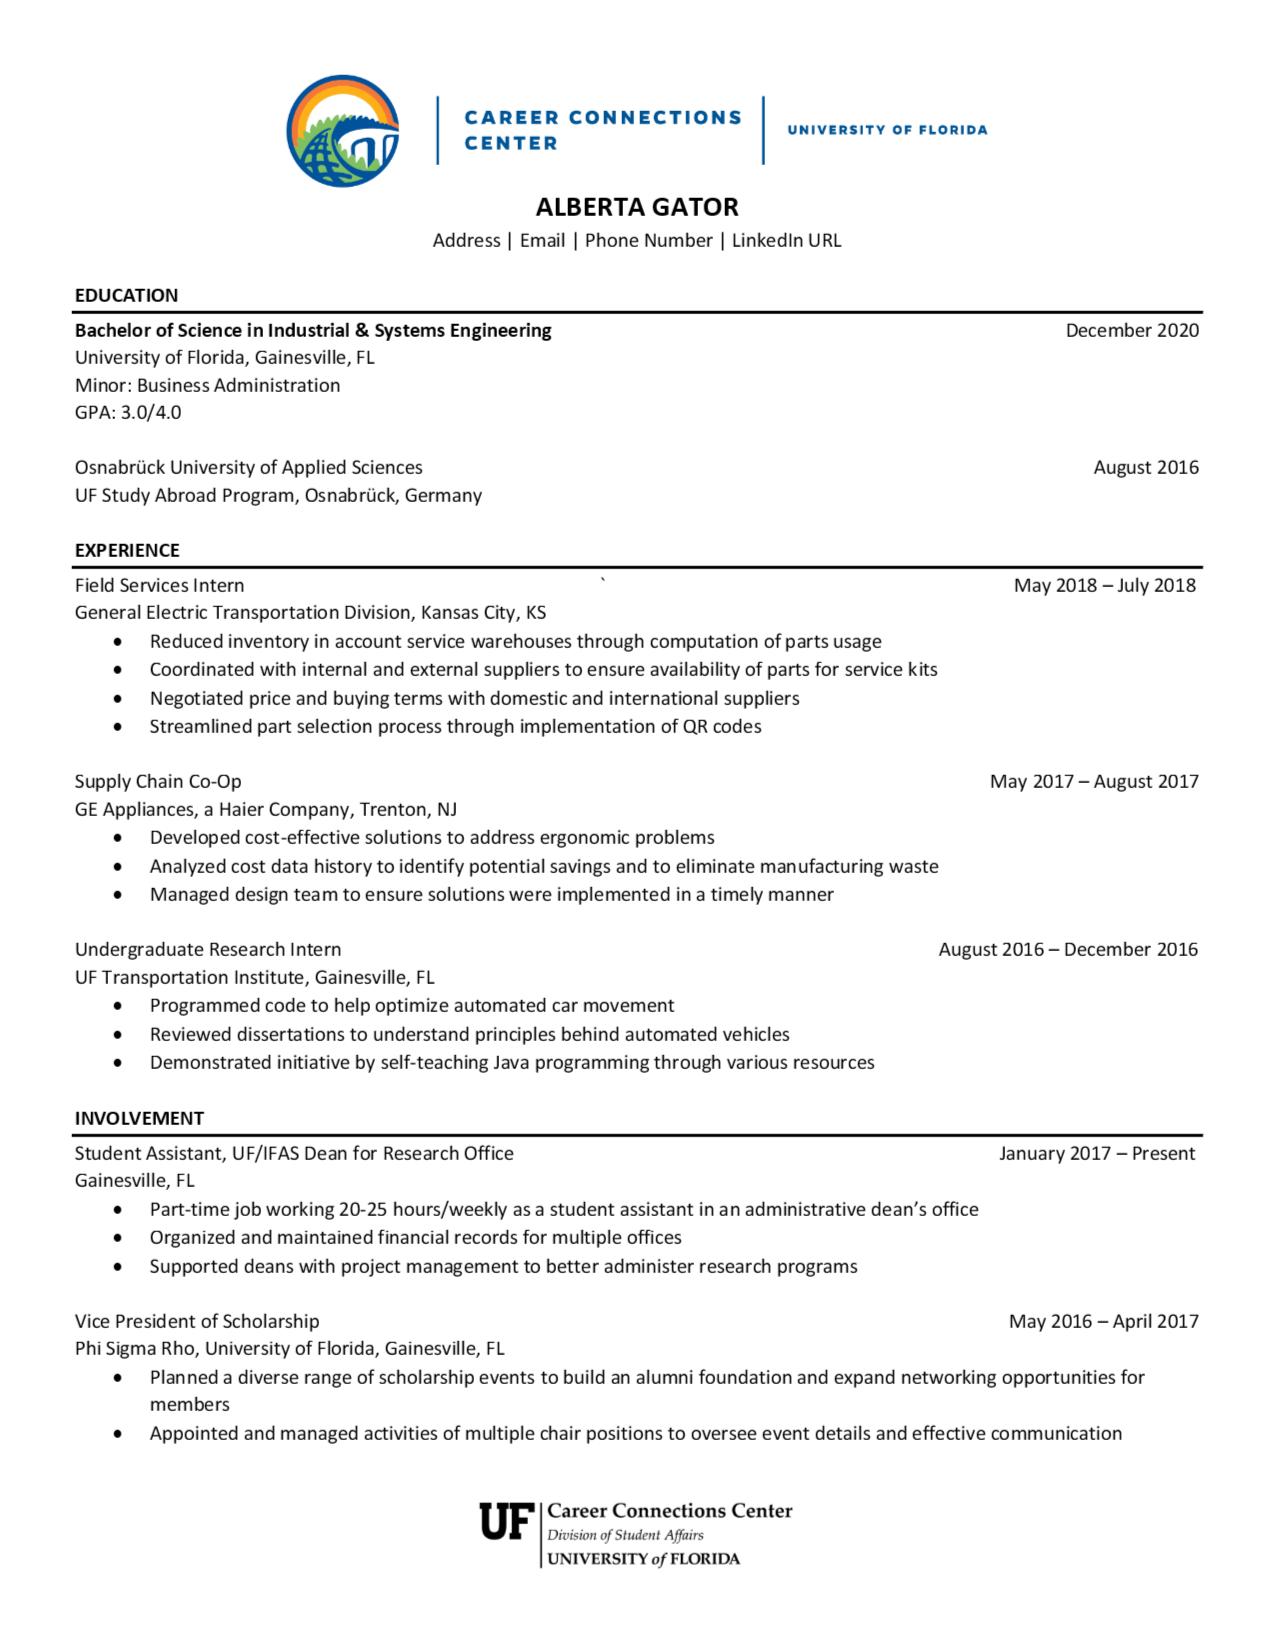 Resumes Career Connections Center